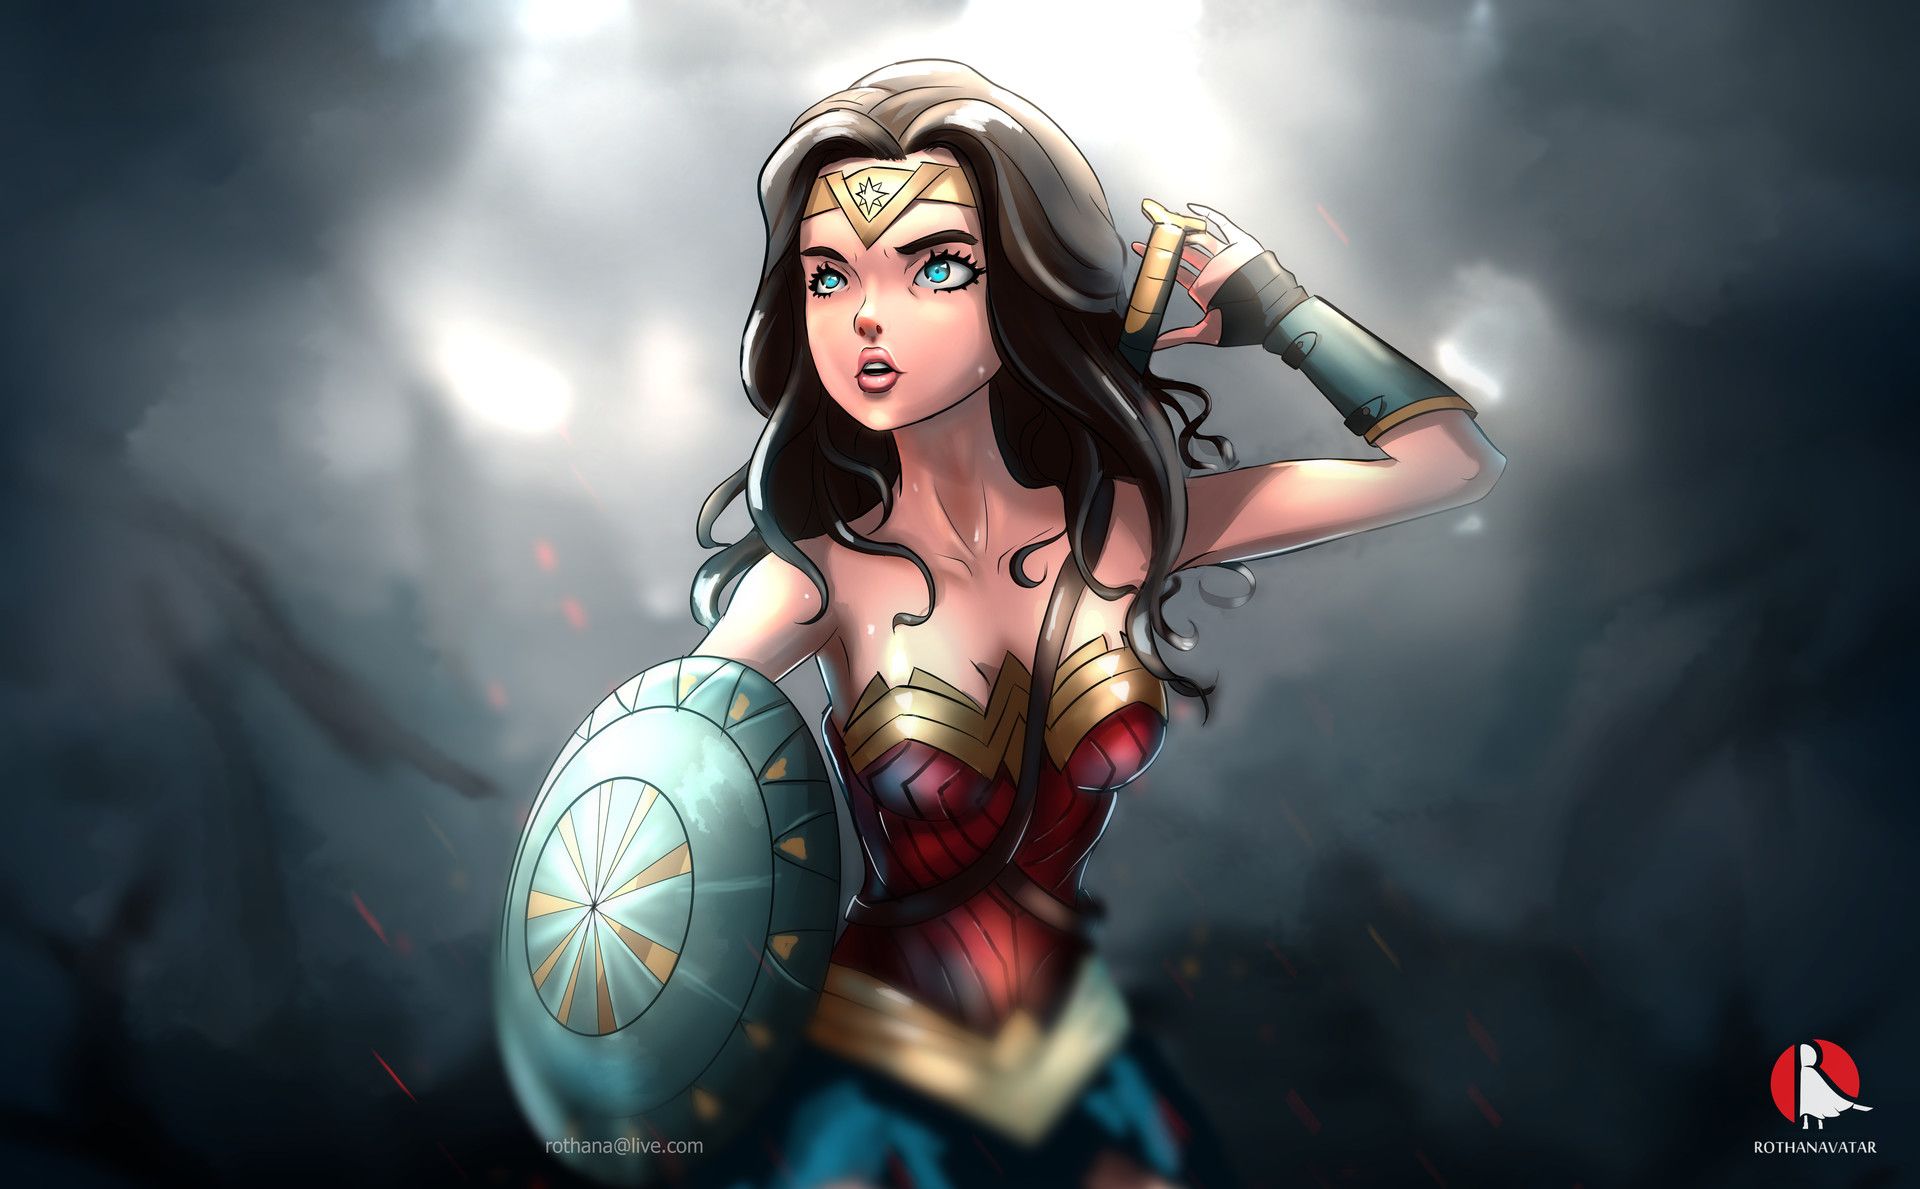 Wonder Woman Cartoon Artwork, HD Superheroes, 4k Wallpapers, Image, Backgrounds, Photos and Pictures